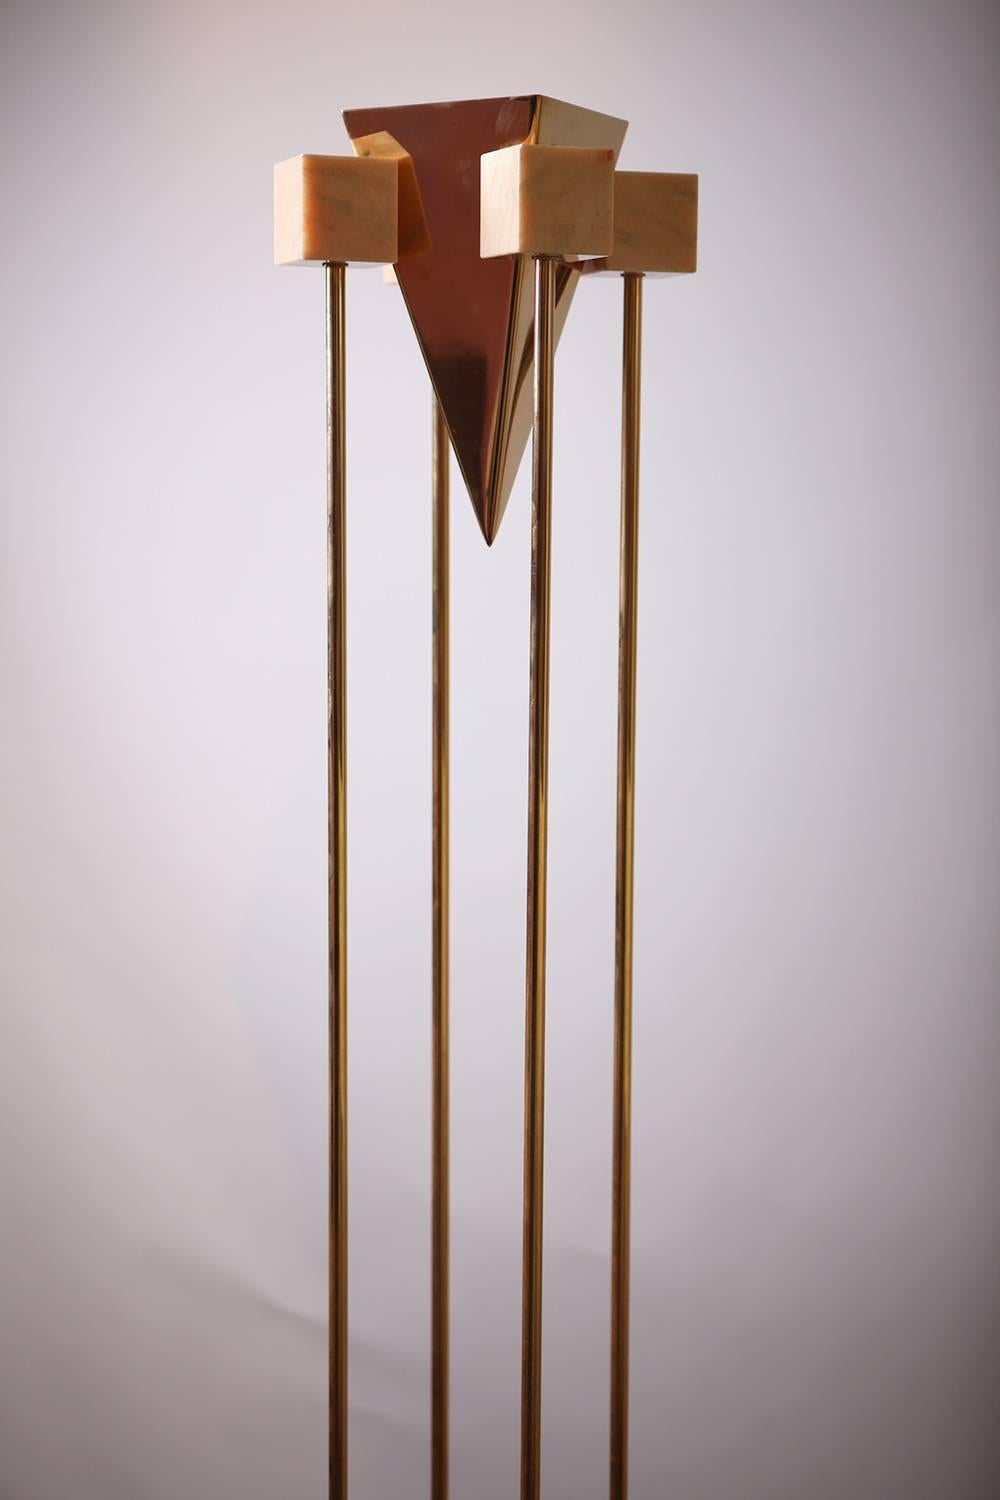 Italian floor lamp from the 1970s.

Very chic and elegant lamp in pink marble and four brass rods,

circa 1970

Measures: H: 210 cm